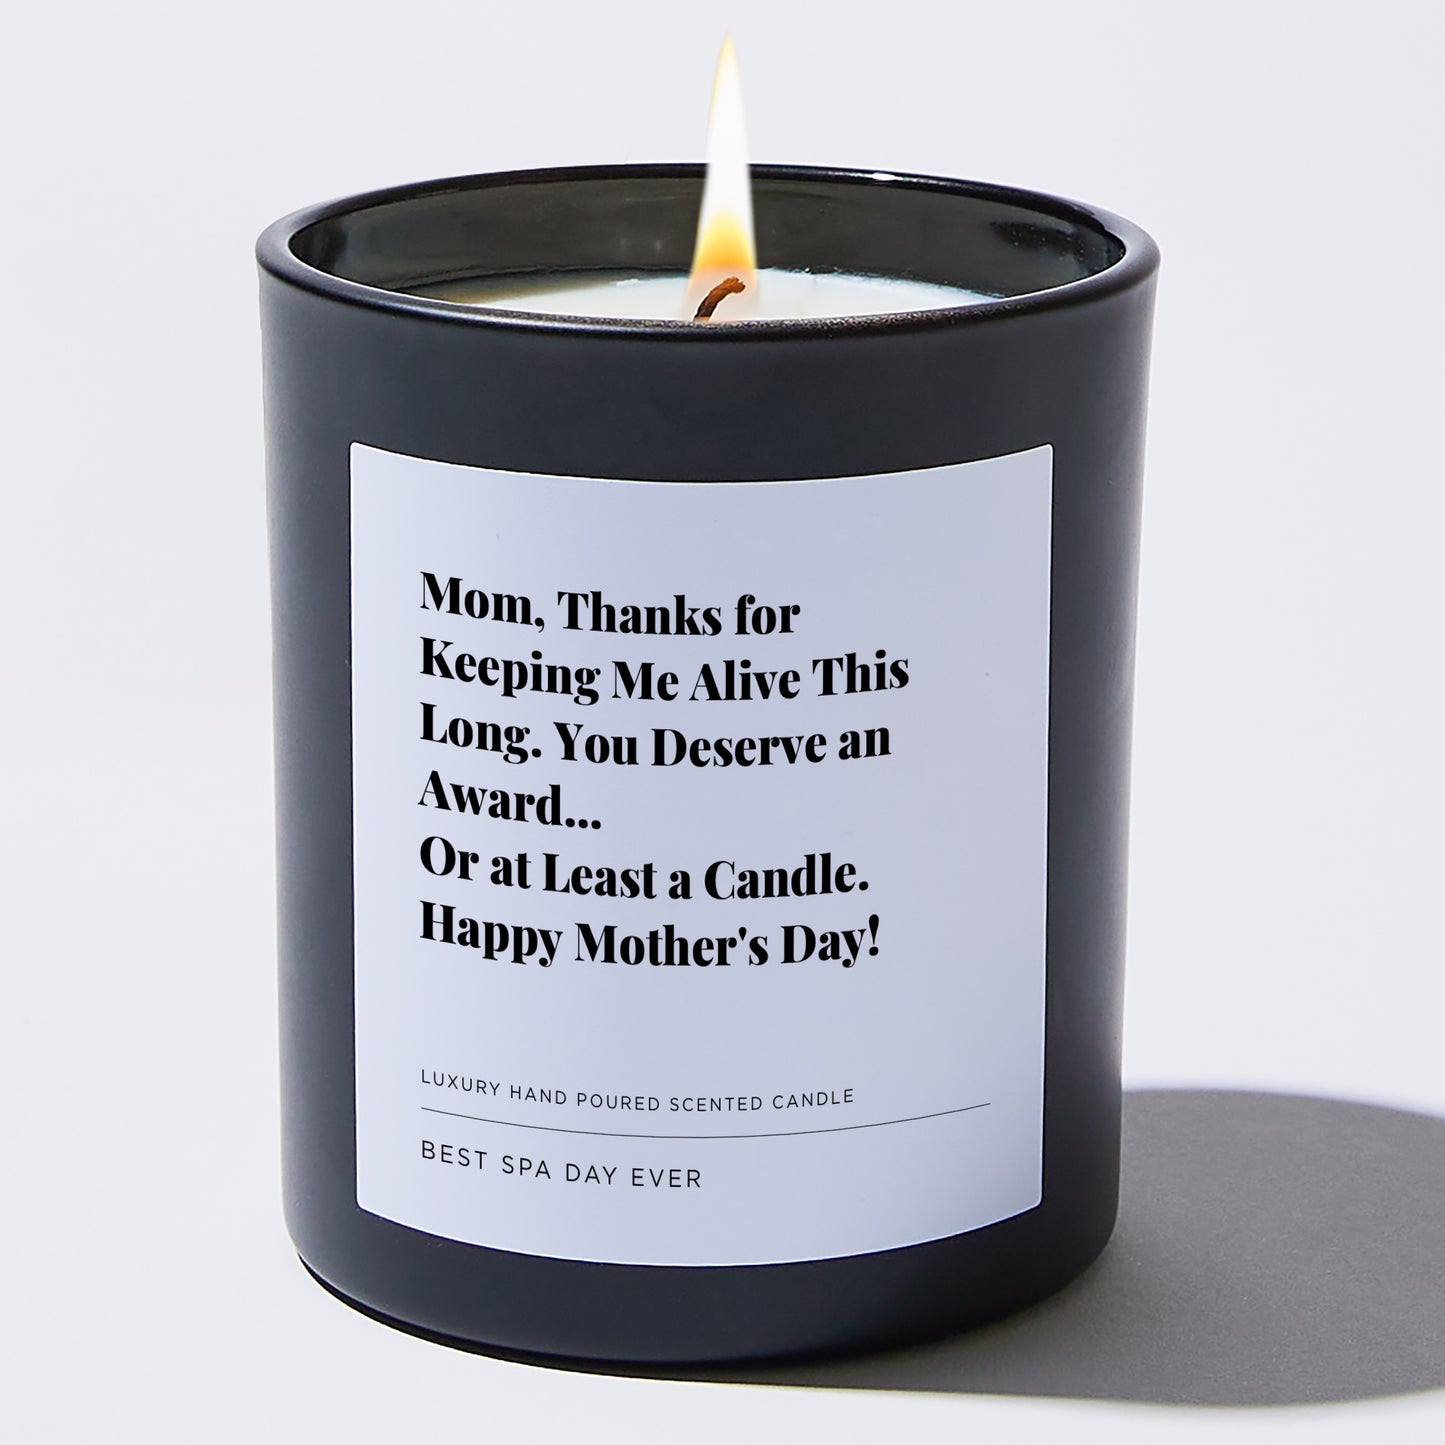 Gift for Mom - Mom, thanks for keeping me alive this long. You deserve an award... or at least a candle. Happy Mother's Day! - Candle